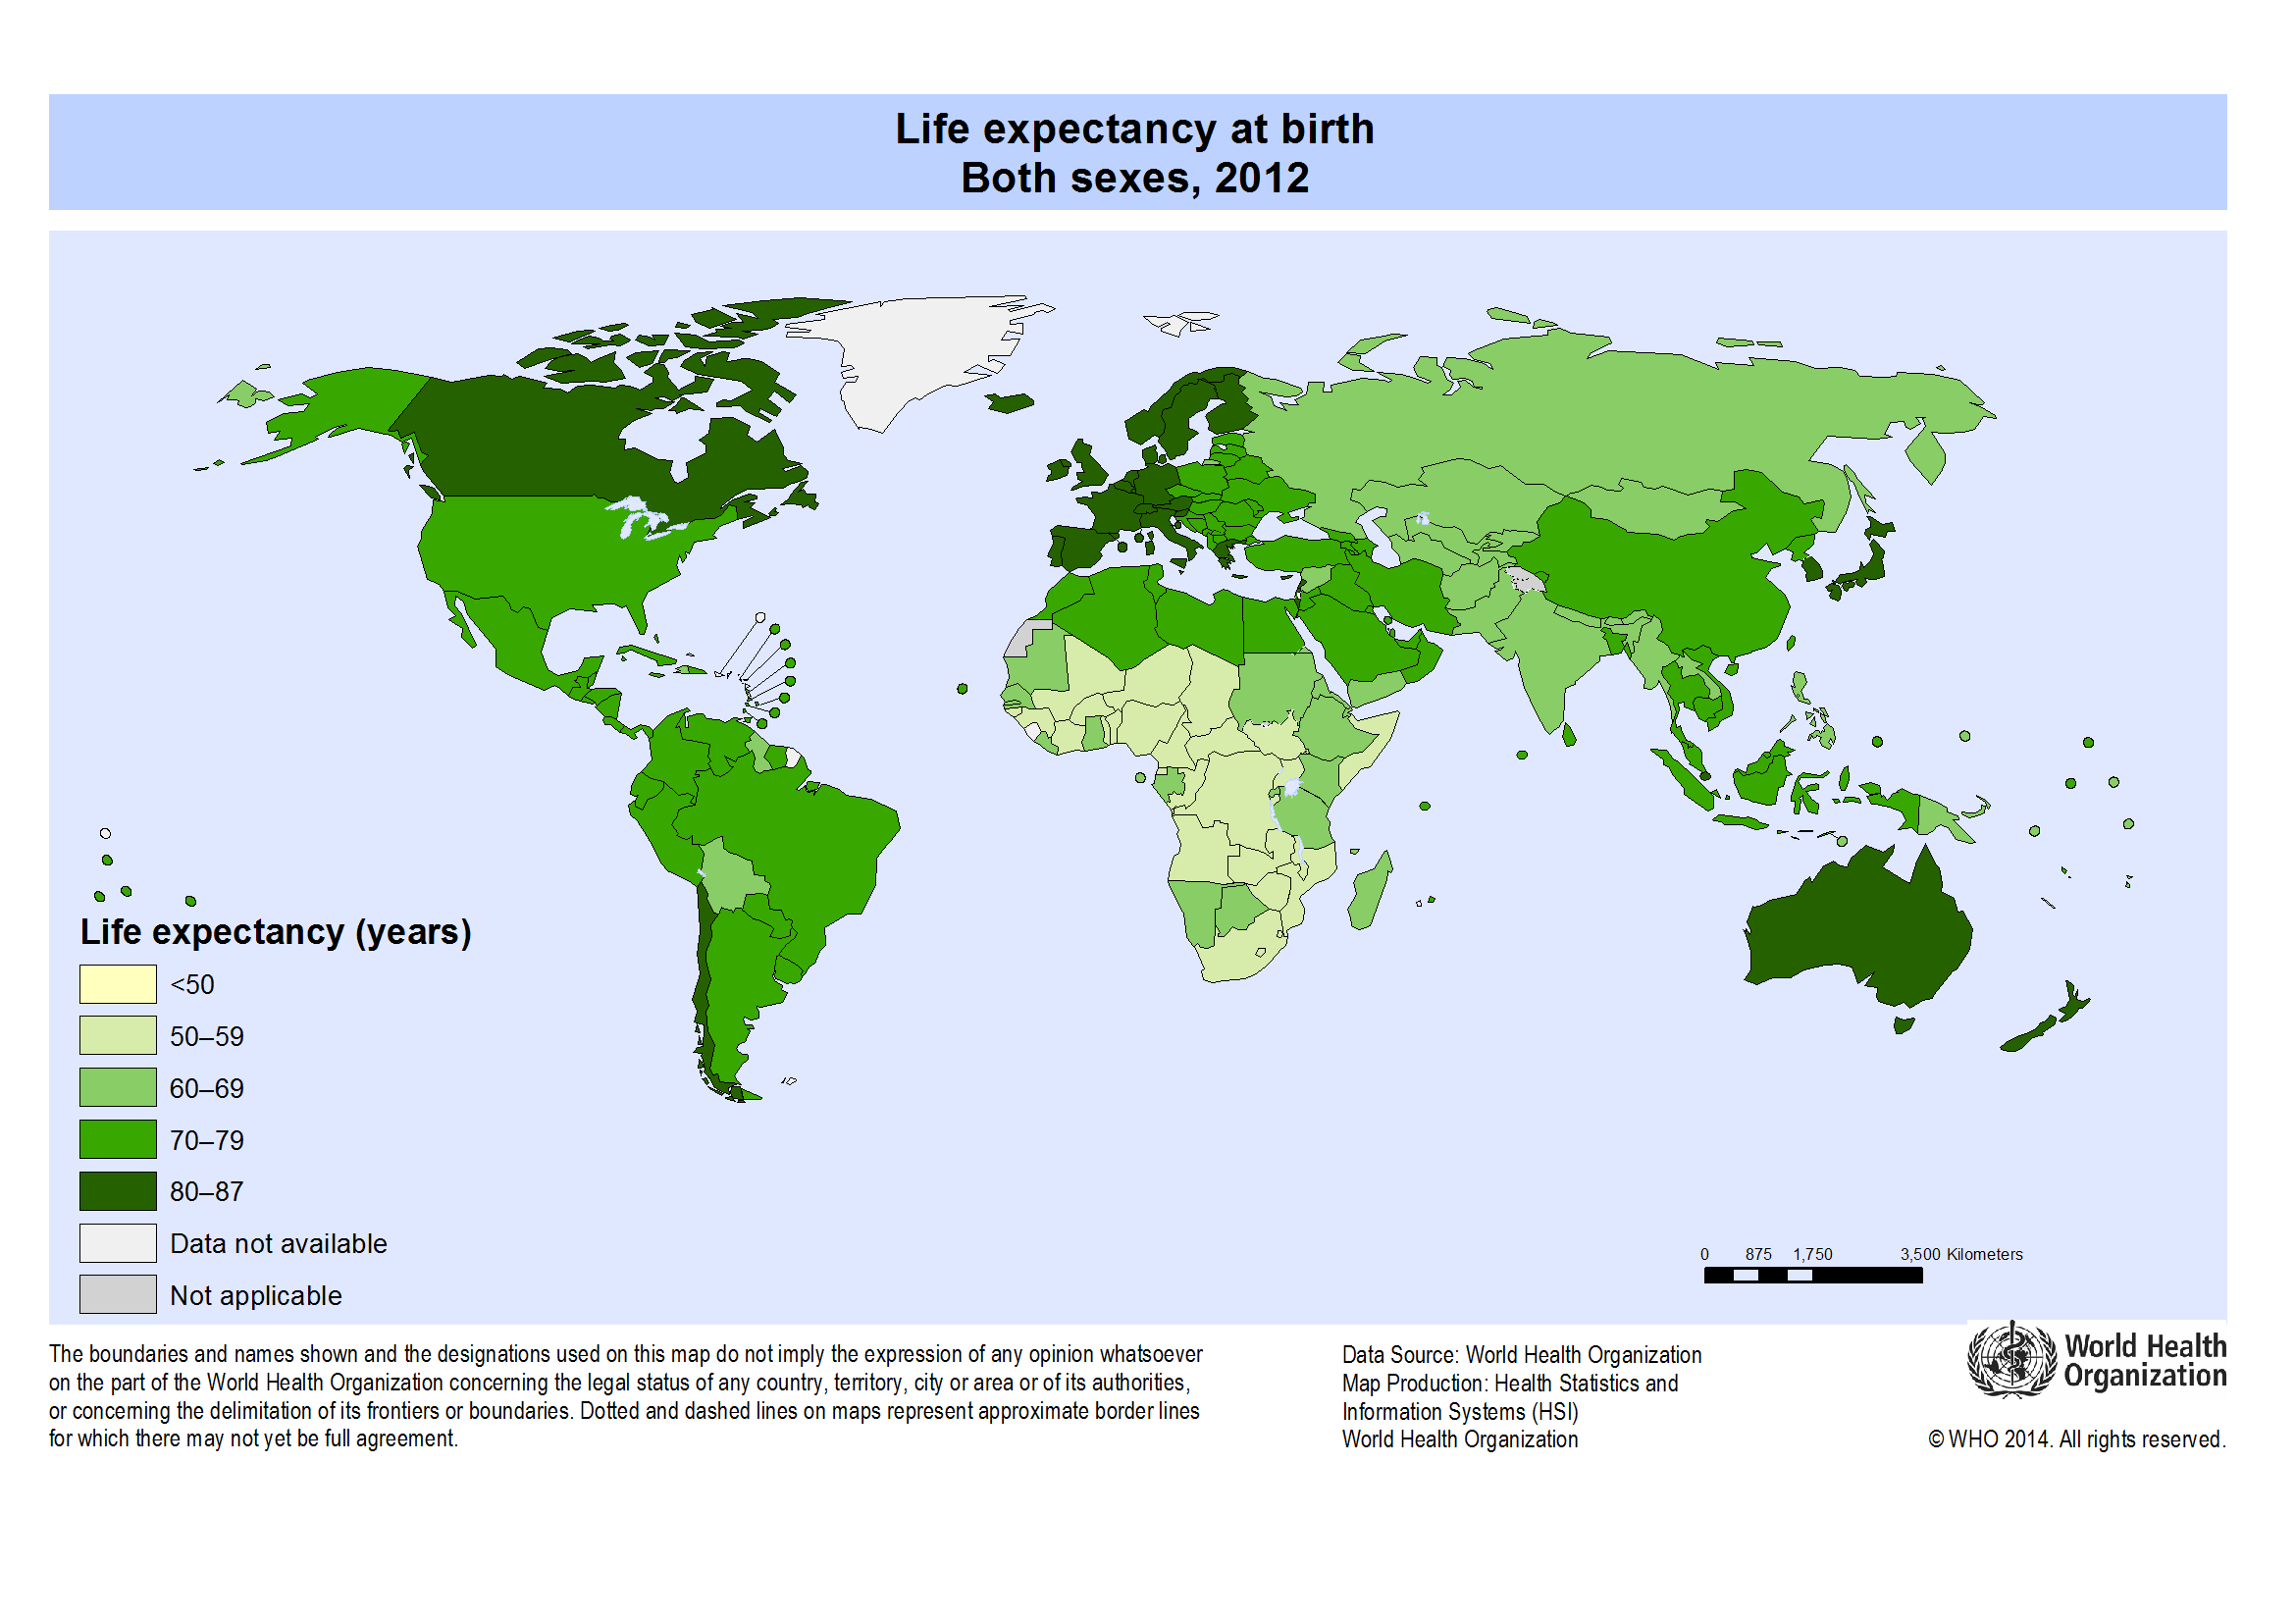 Life Expectancy World map, see text description in link below